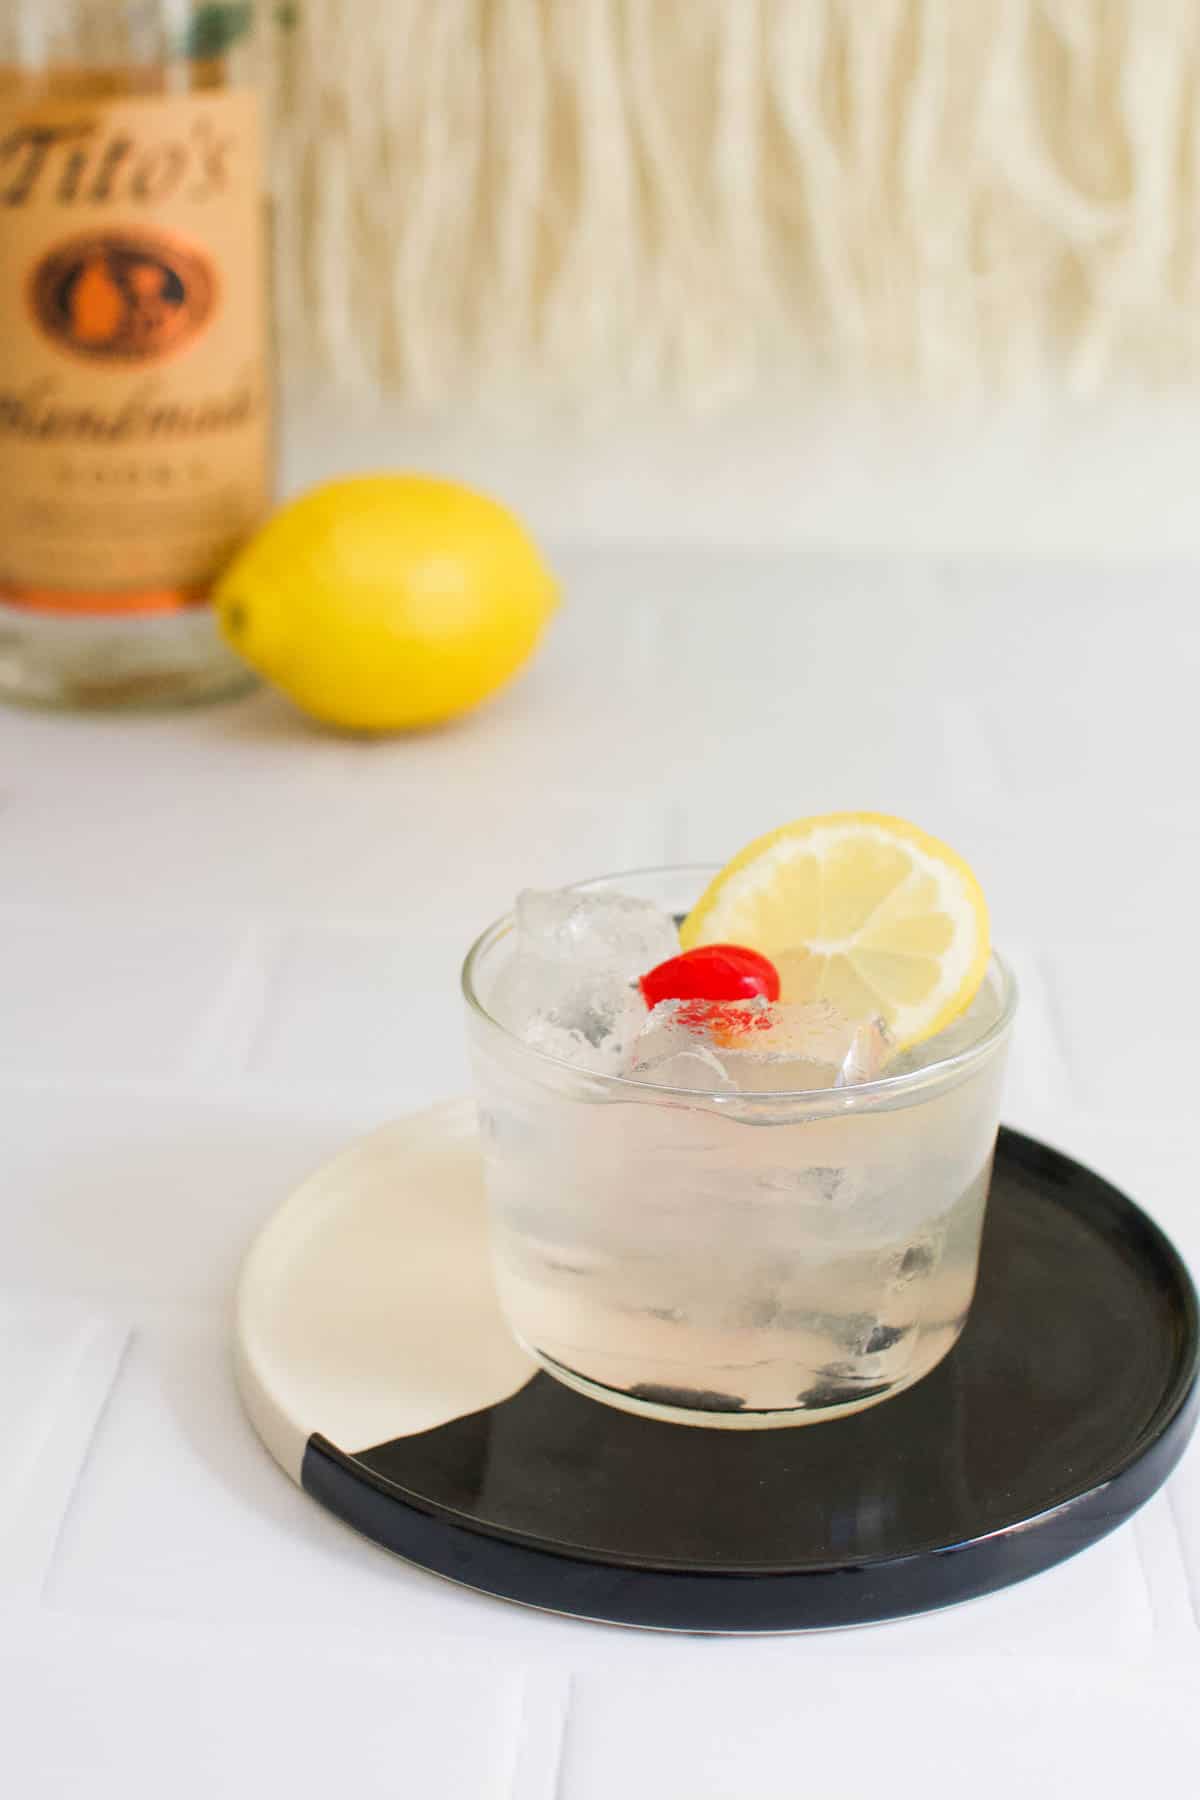 Vodka Sour on a black and white tray with a lemon and bottle of vodka in the background.